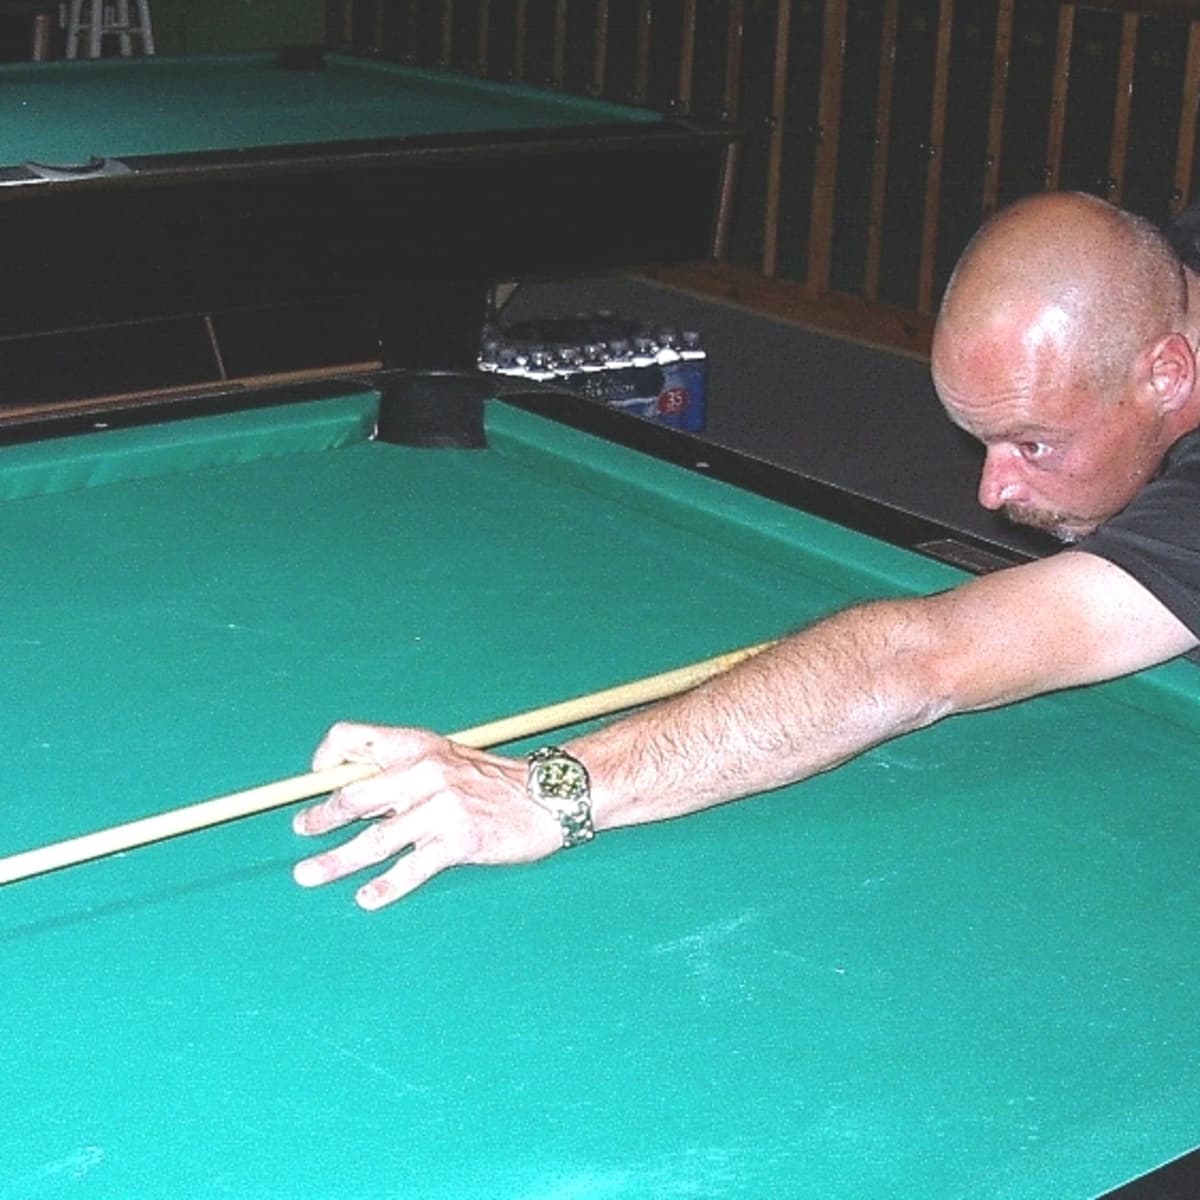 Pool 8-Ball and 9-Ball the Stance